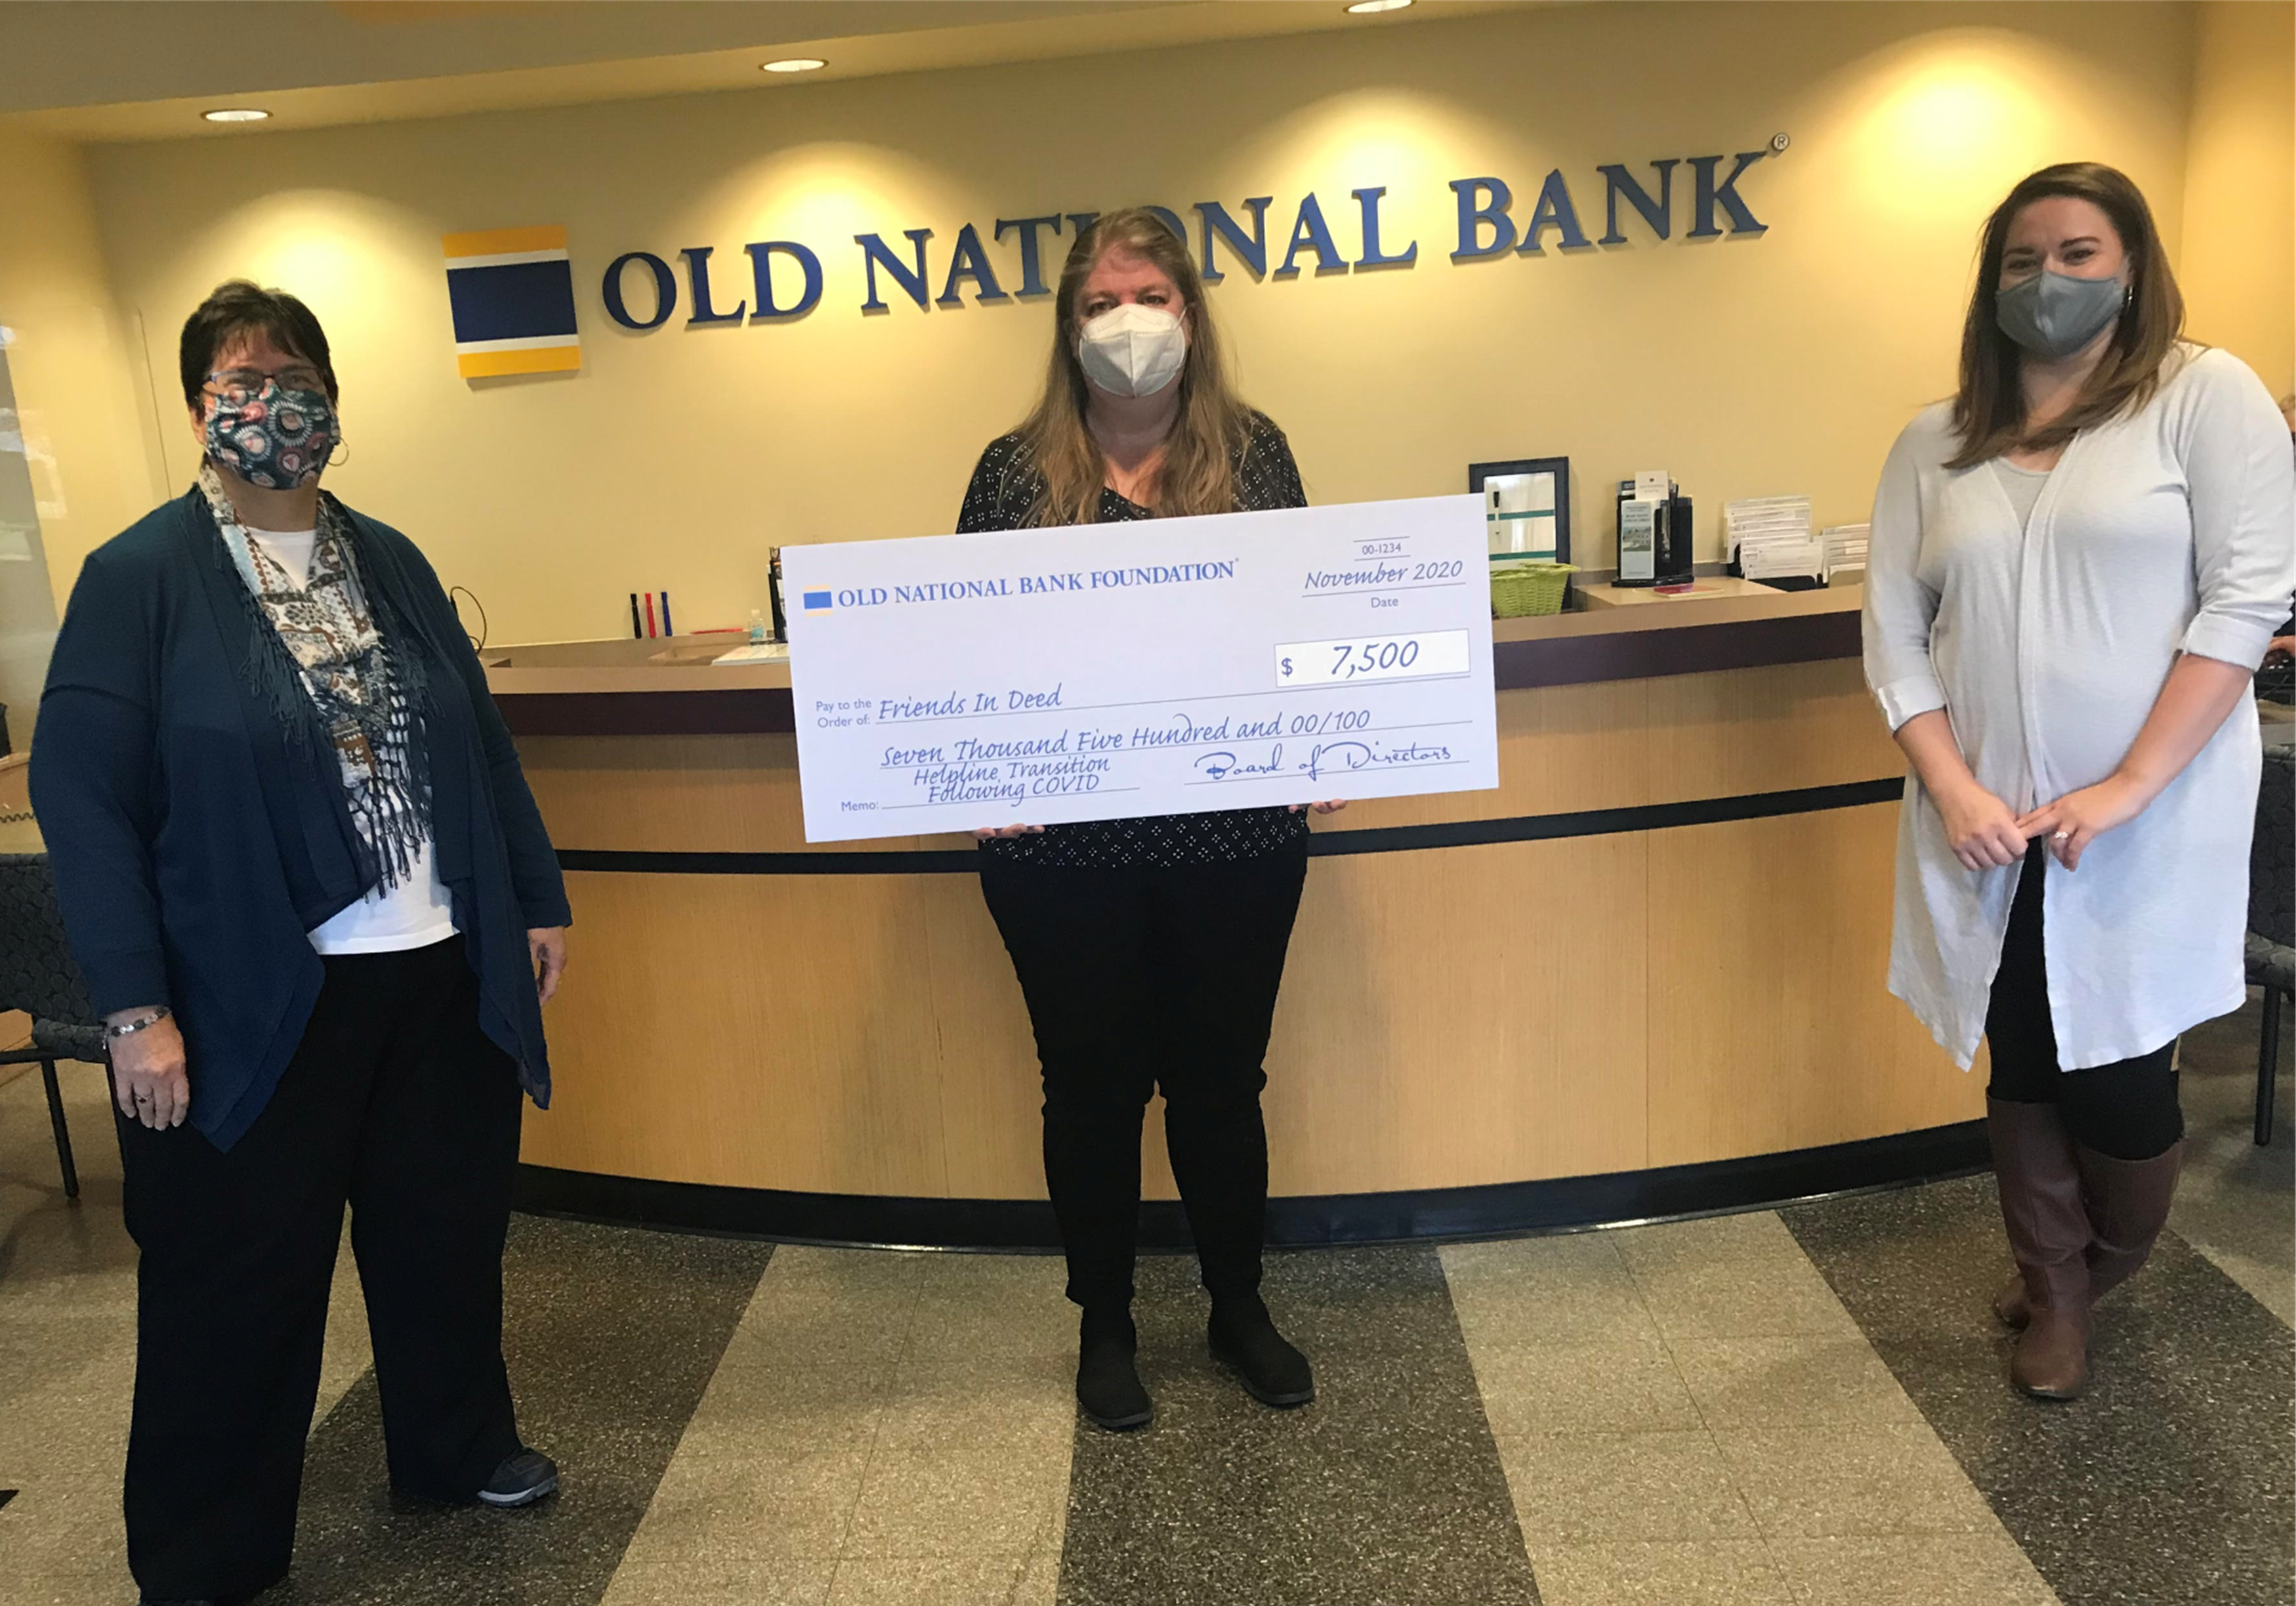 Old National Bank Awards $7,500 Grant to Friends In Deed